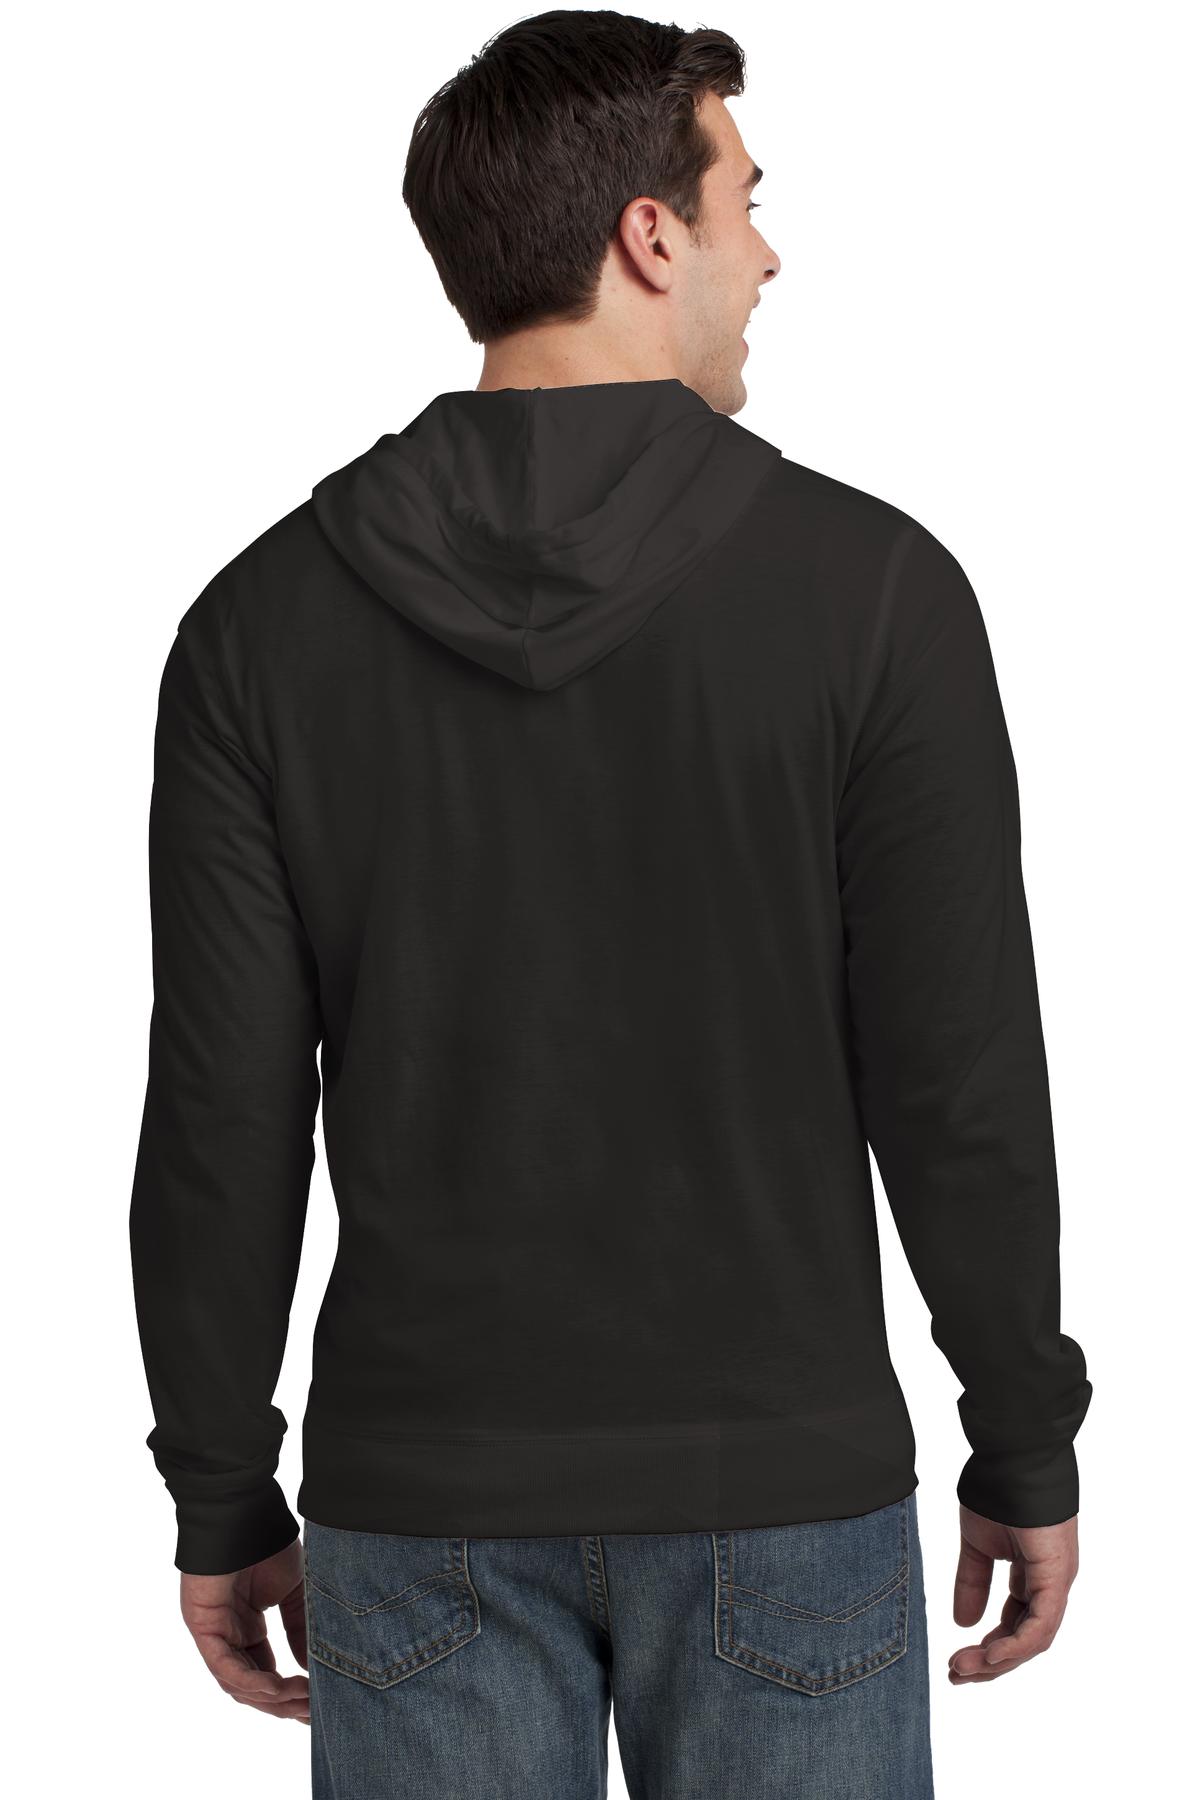 District Young Mens Jersey Full Zip Hoodie-3XL (Black) - image 2 of 6